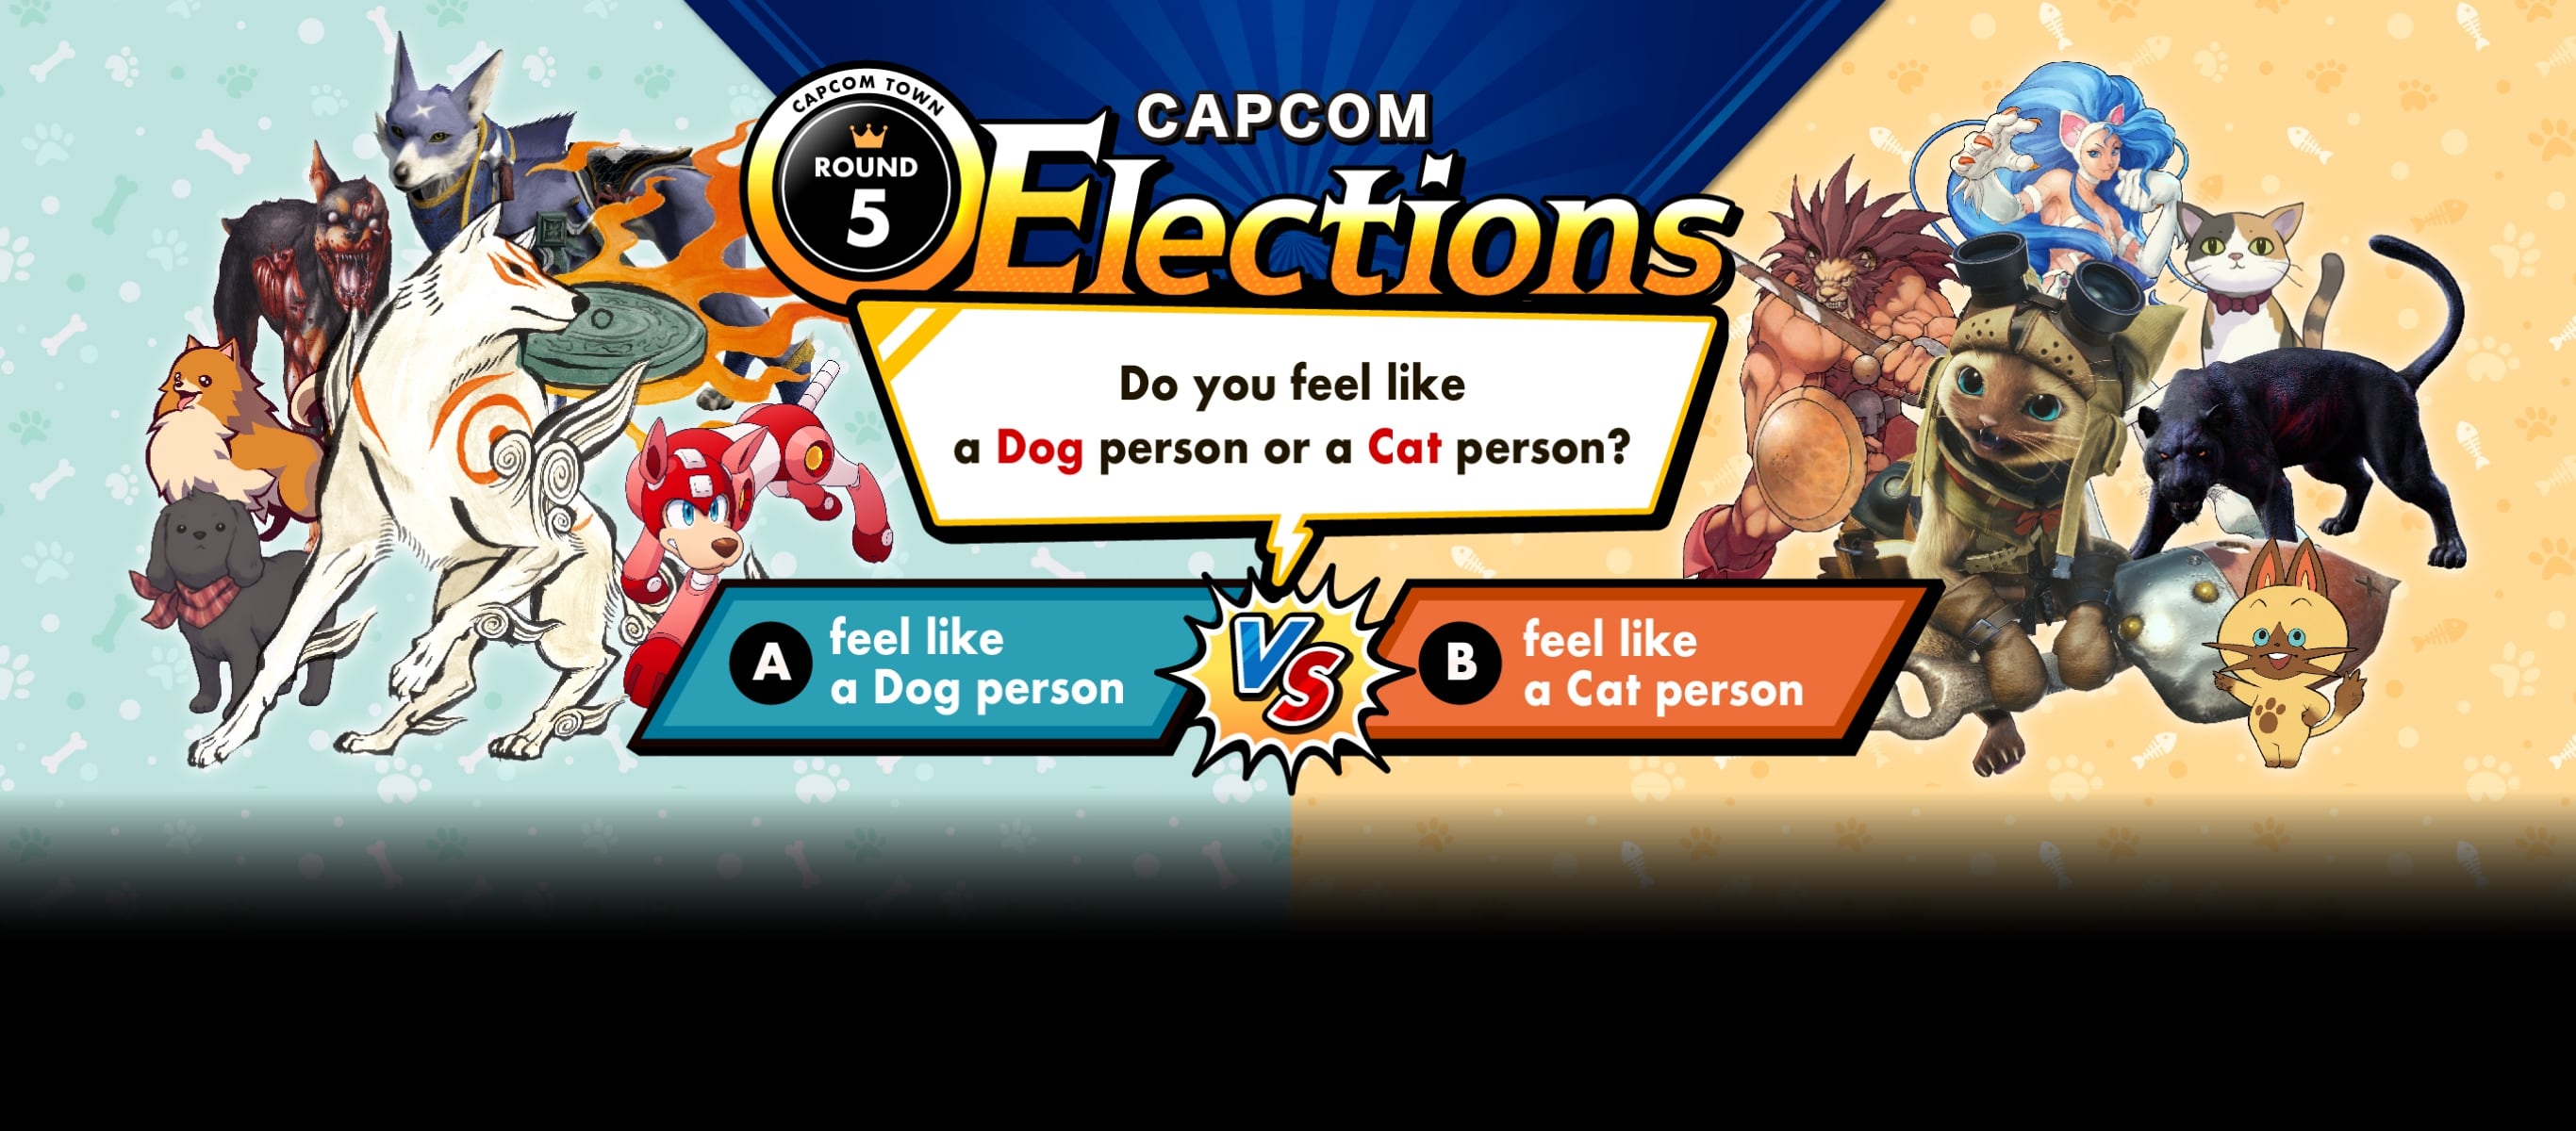 Capcom Elections: Round 5 Do you feel like a Dog person or a Cat person?